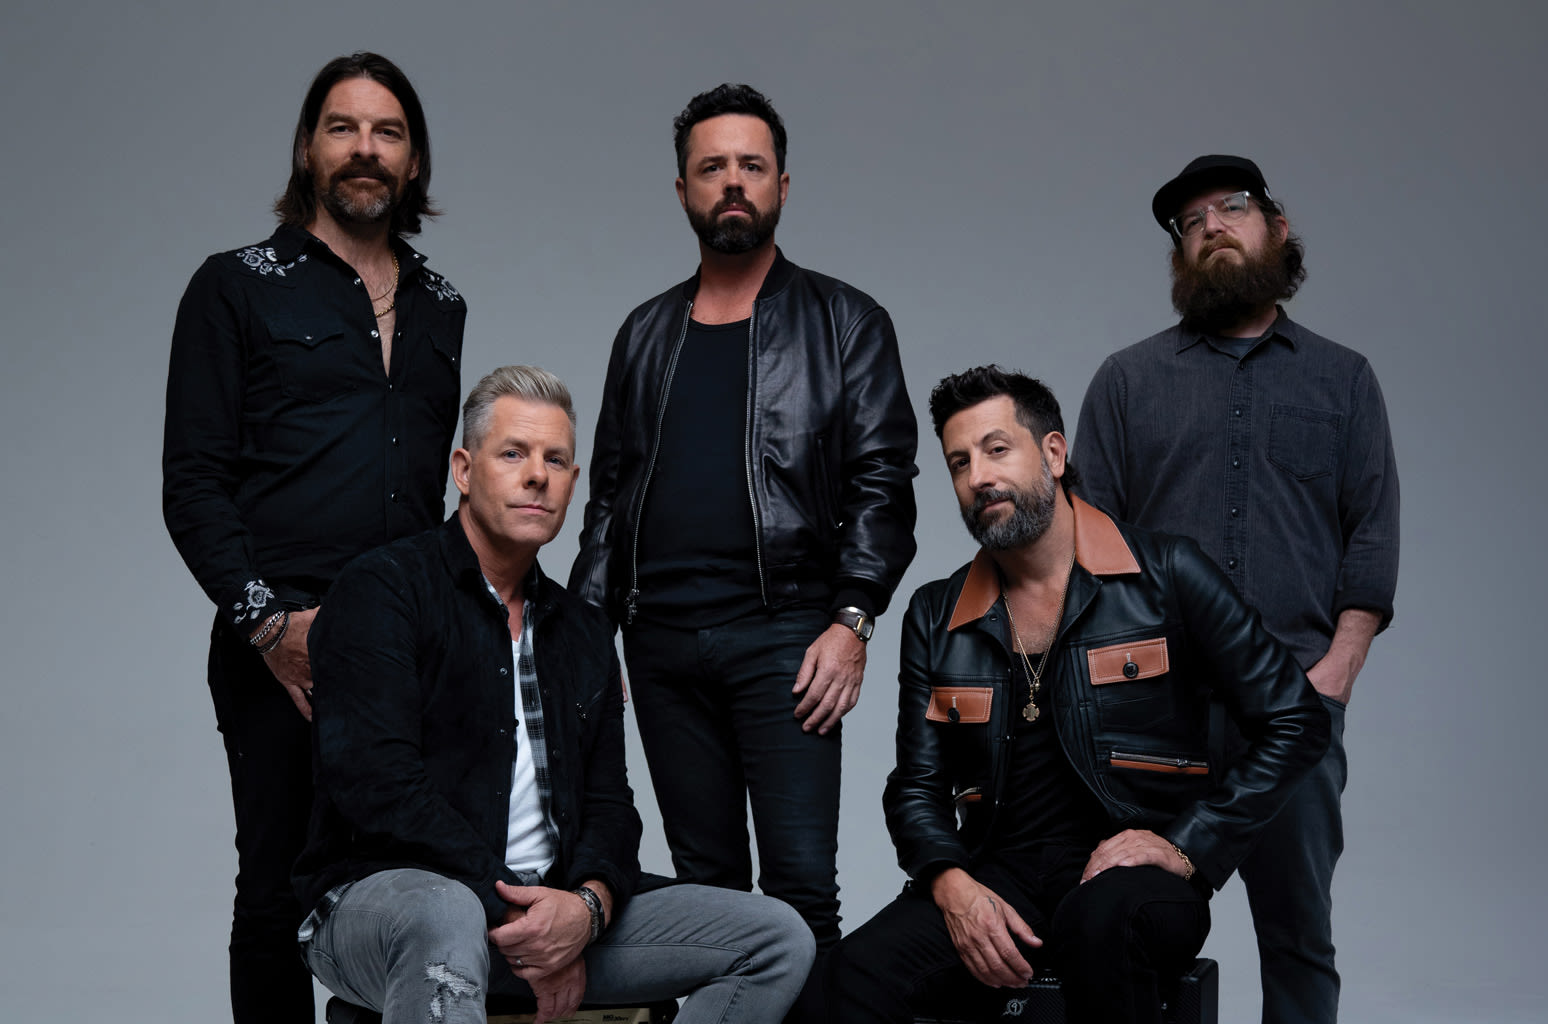 Old Dominion Talks Riding Into the Battle for Listeners With ‘Coming Home’